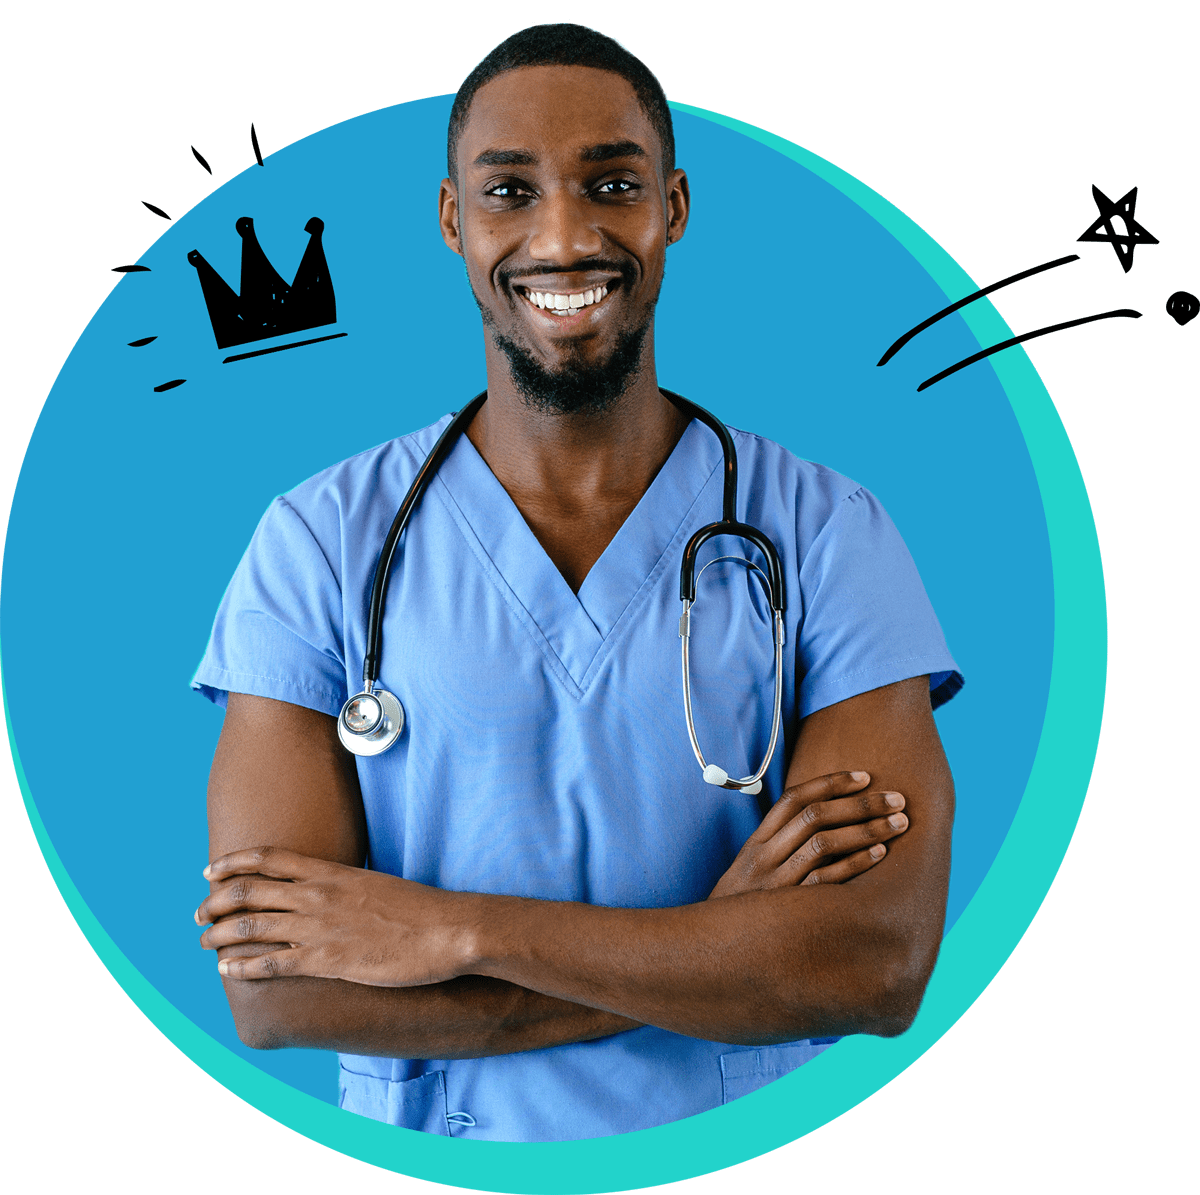 Medical professional in scrubs, nuclear medicine technologist, medical Jobs Canada